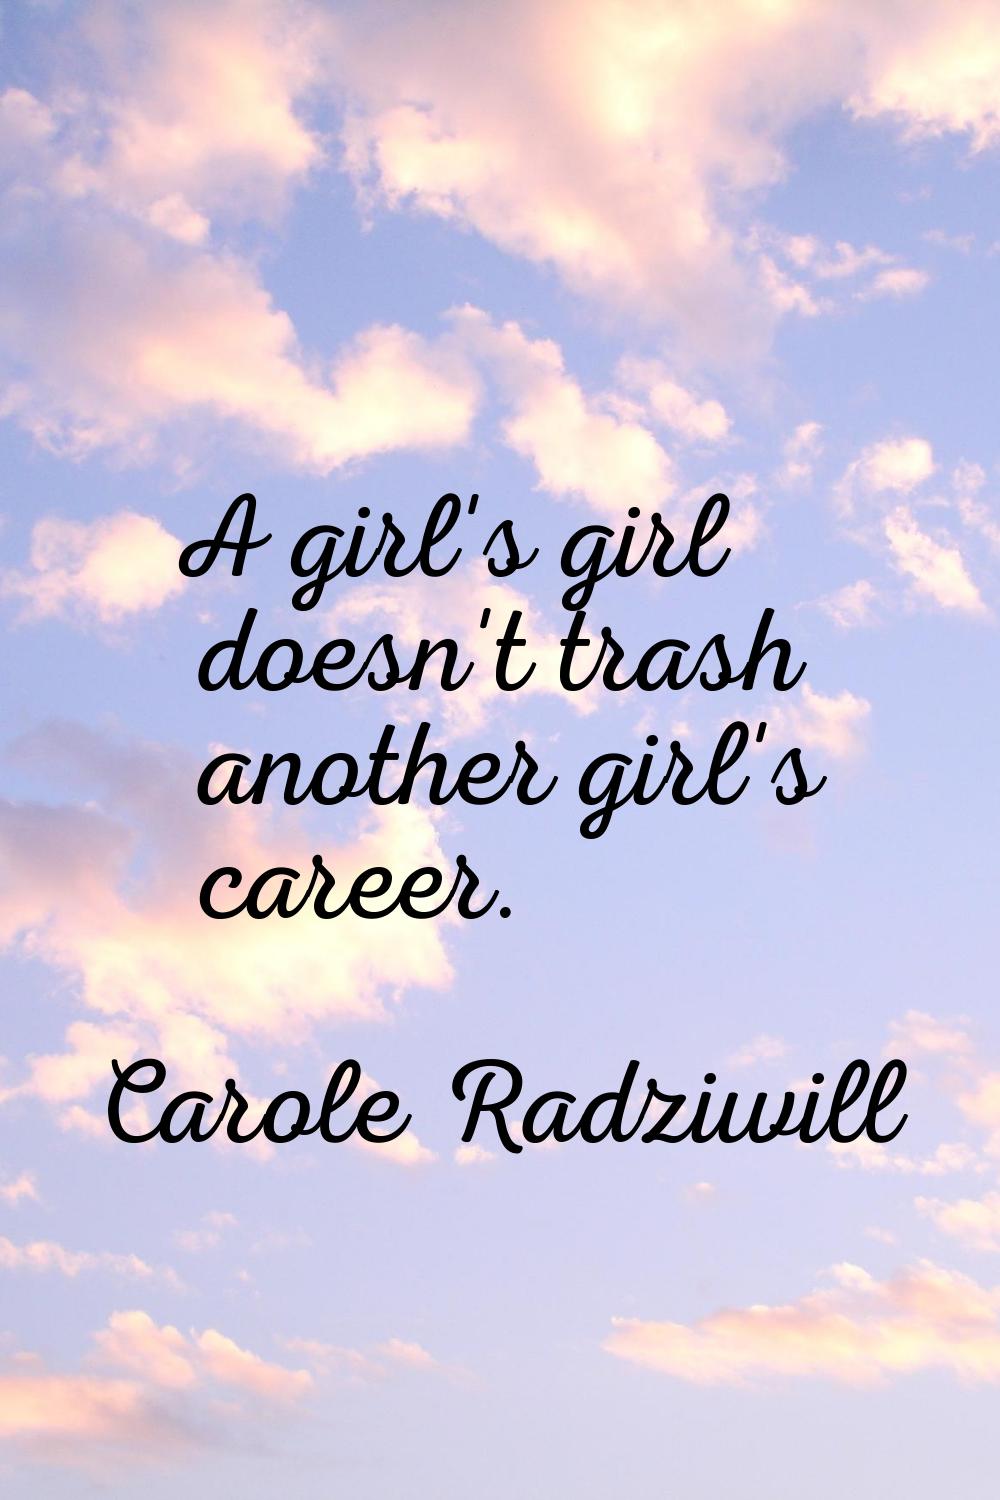 A girl's girl doesn't trash another girl's career.